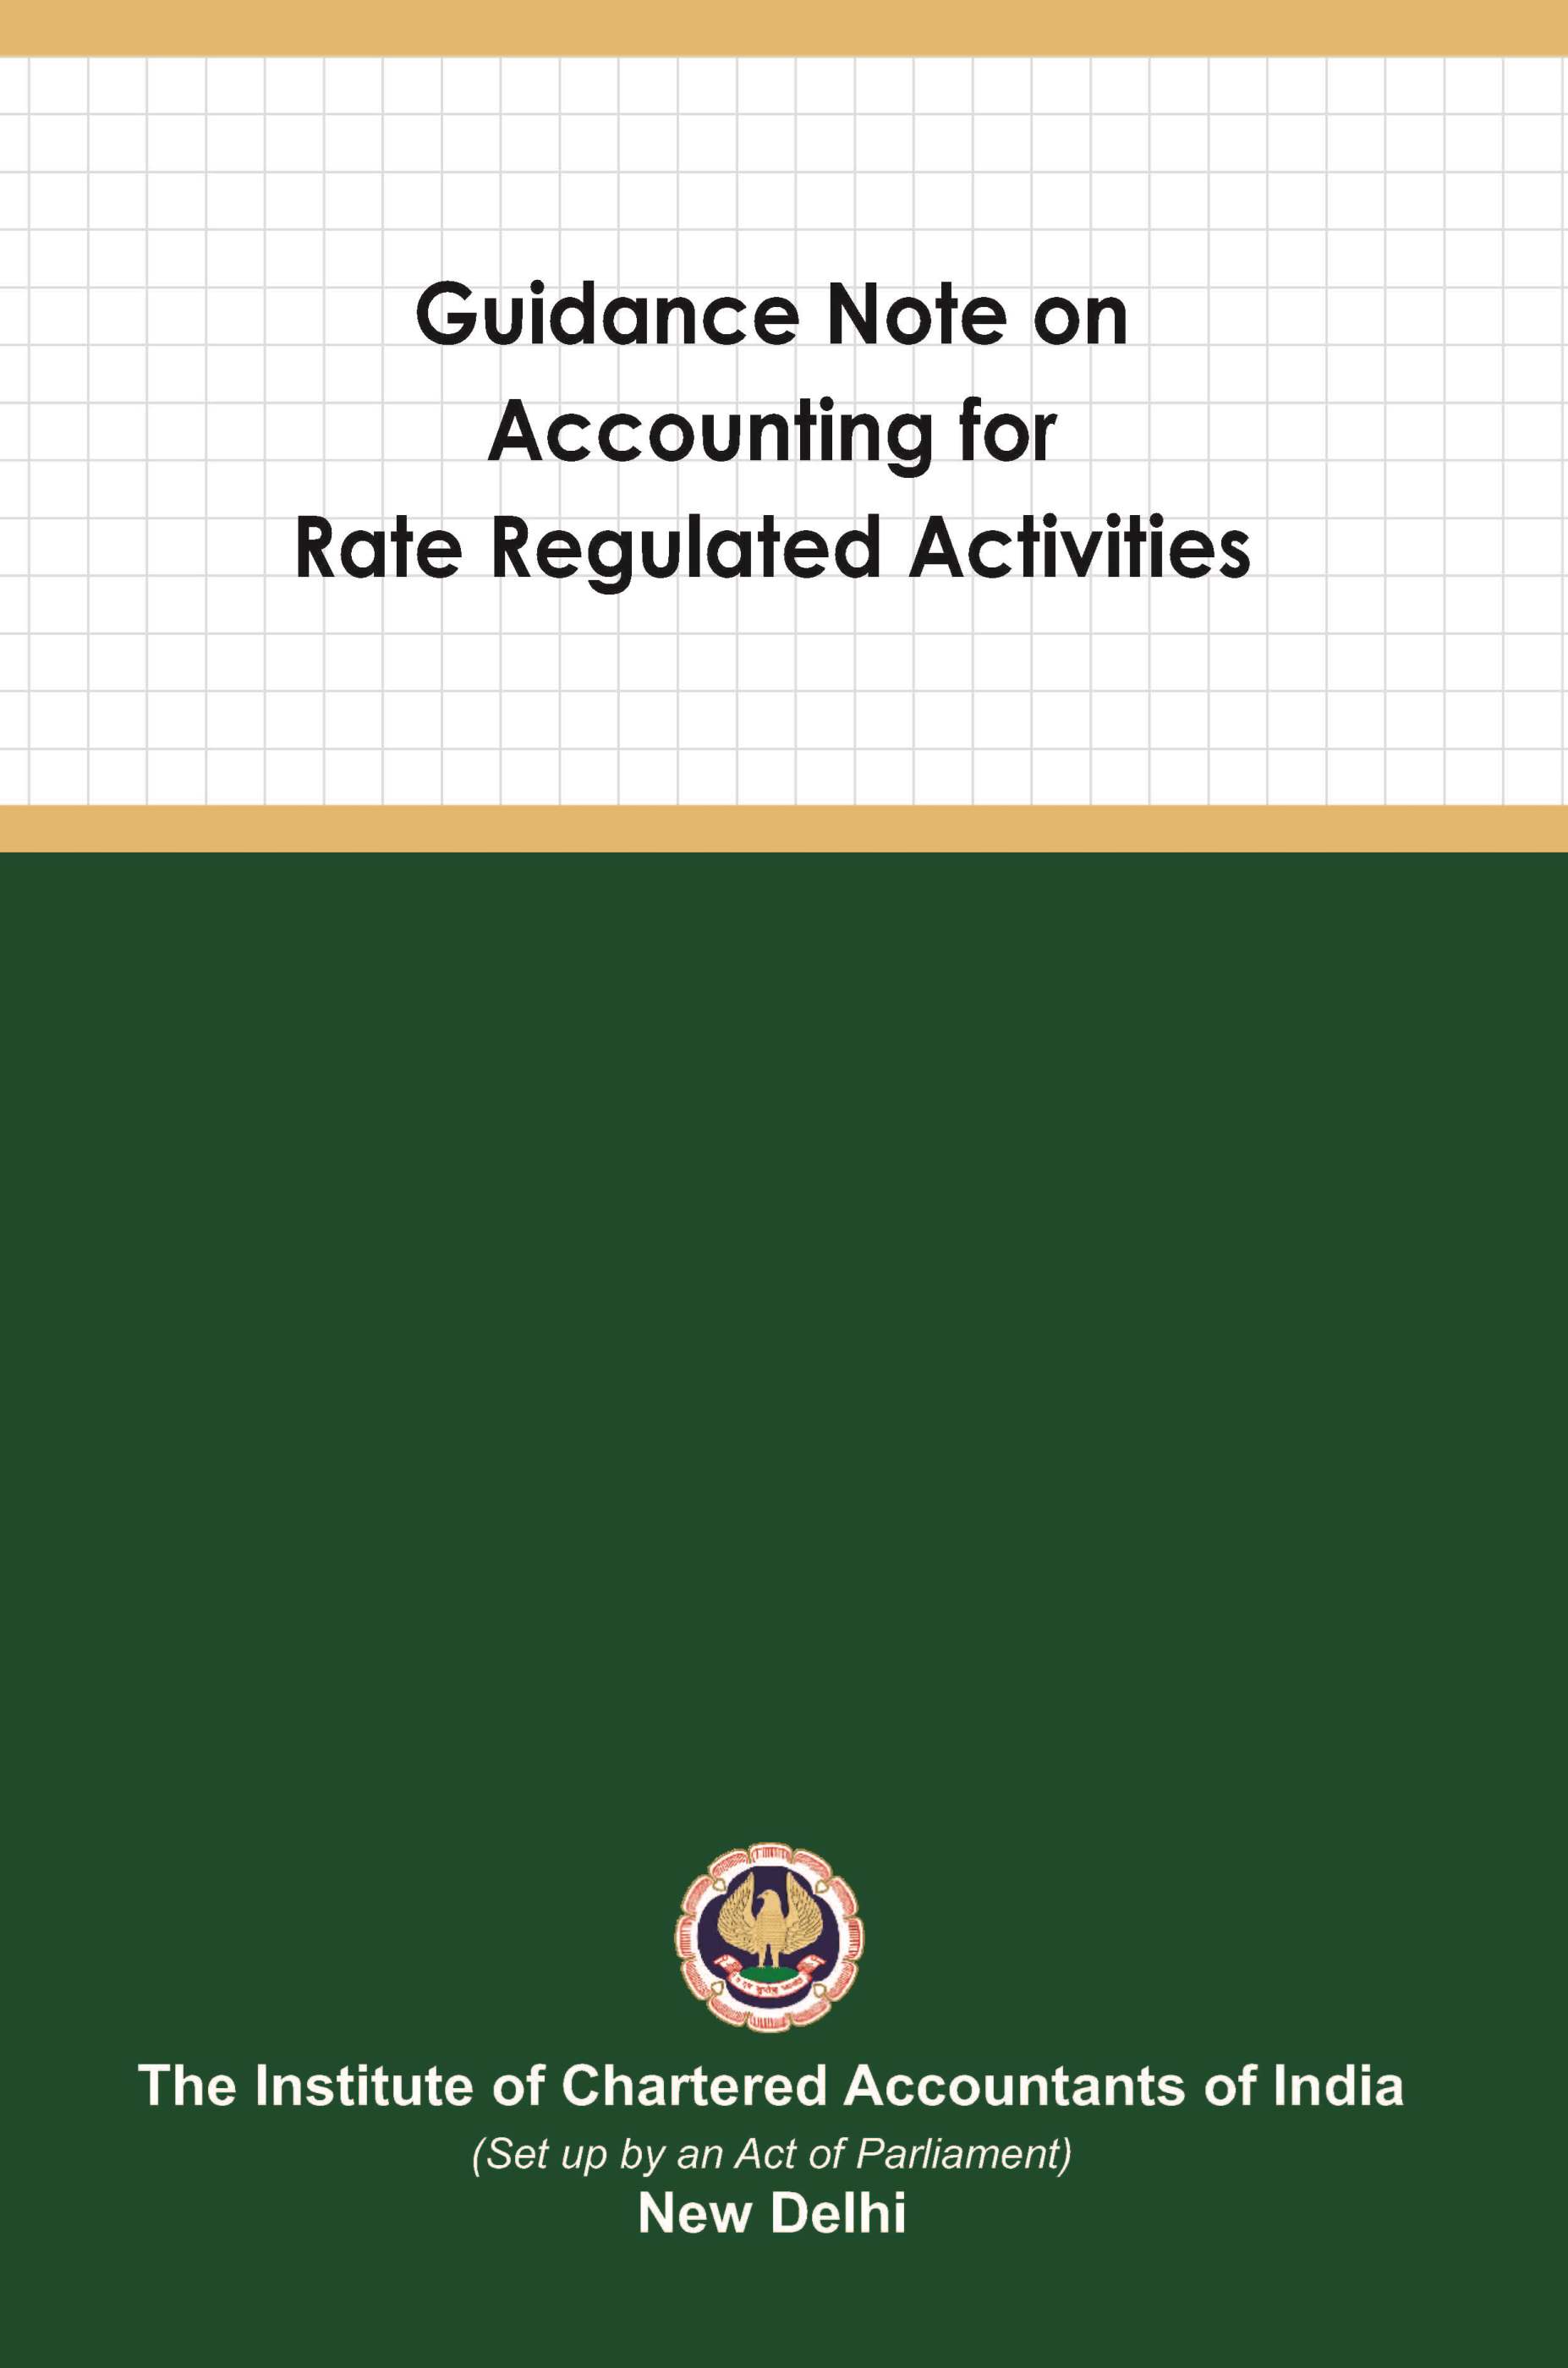 Guidance Note on Accounting for Rate Regulated Activities (February, 2015)